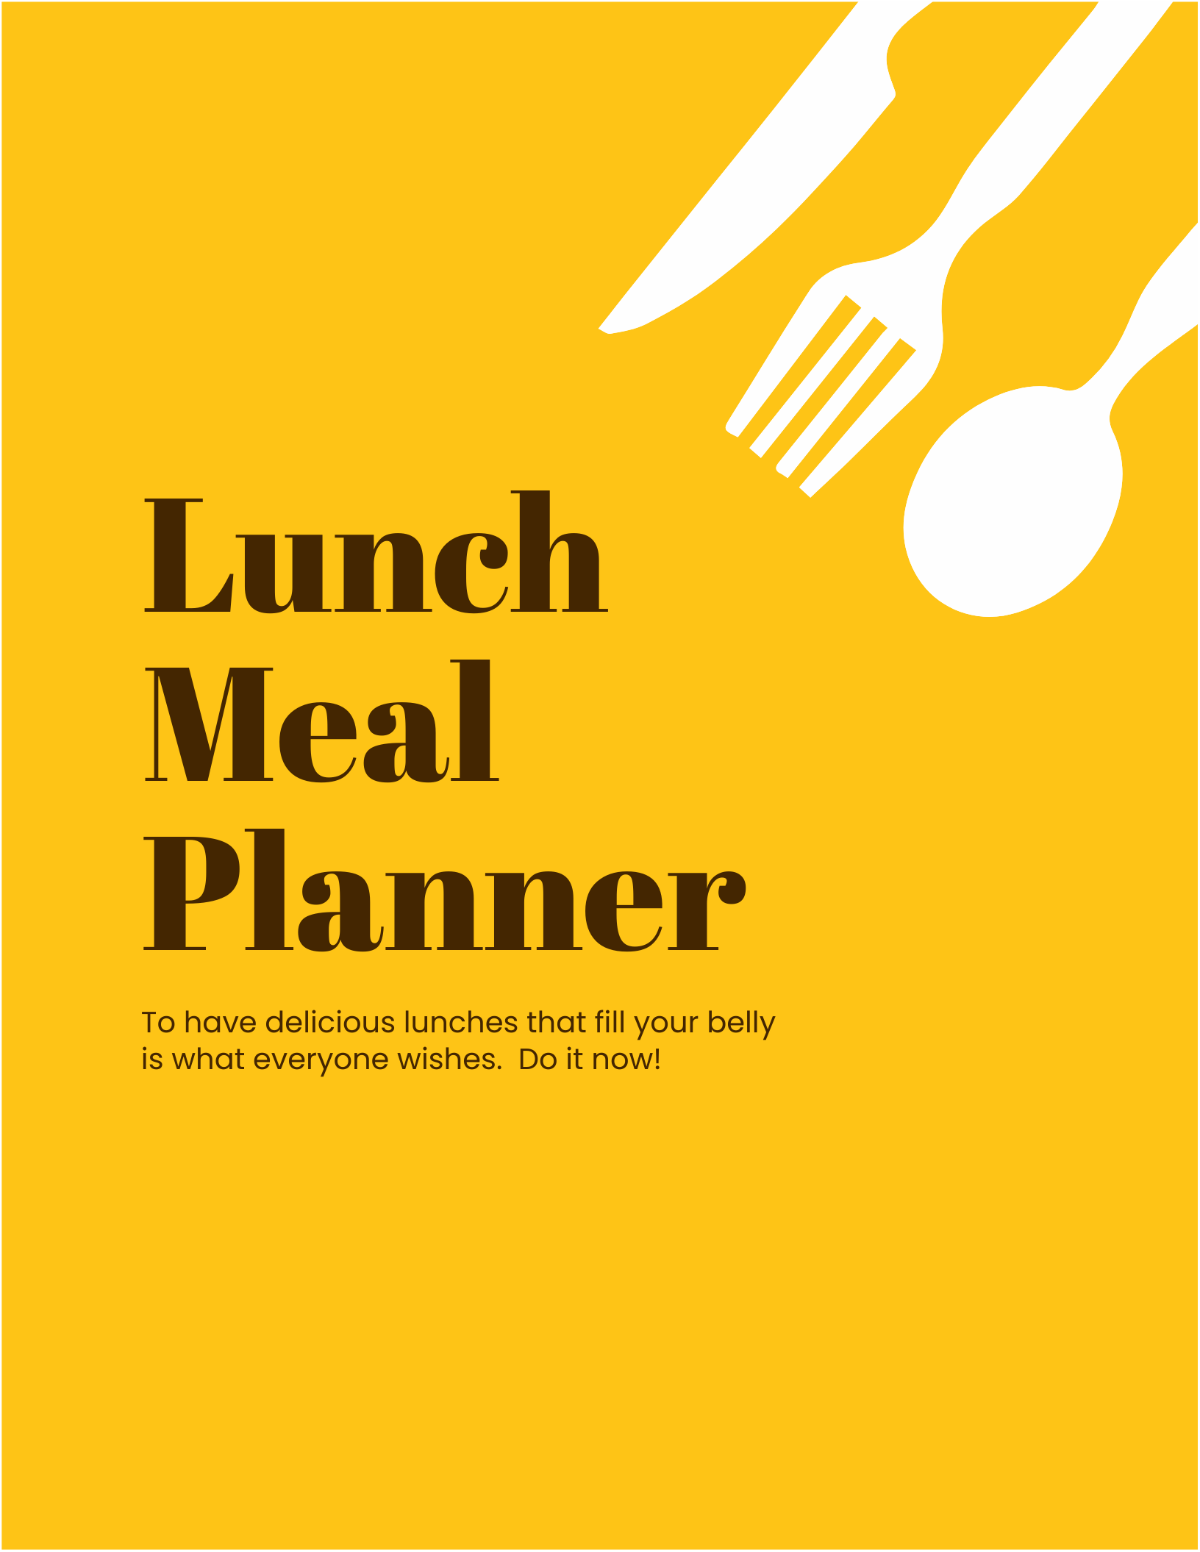 Lunch Meal Planner Template